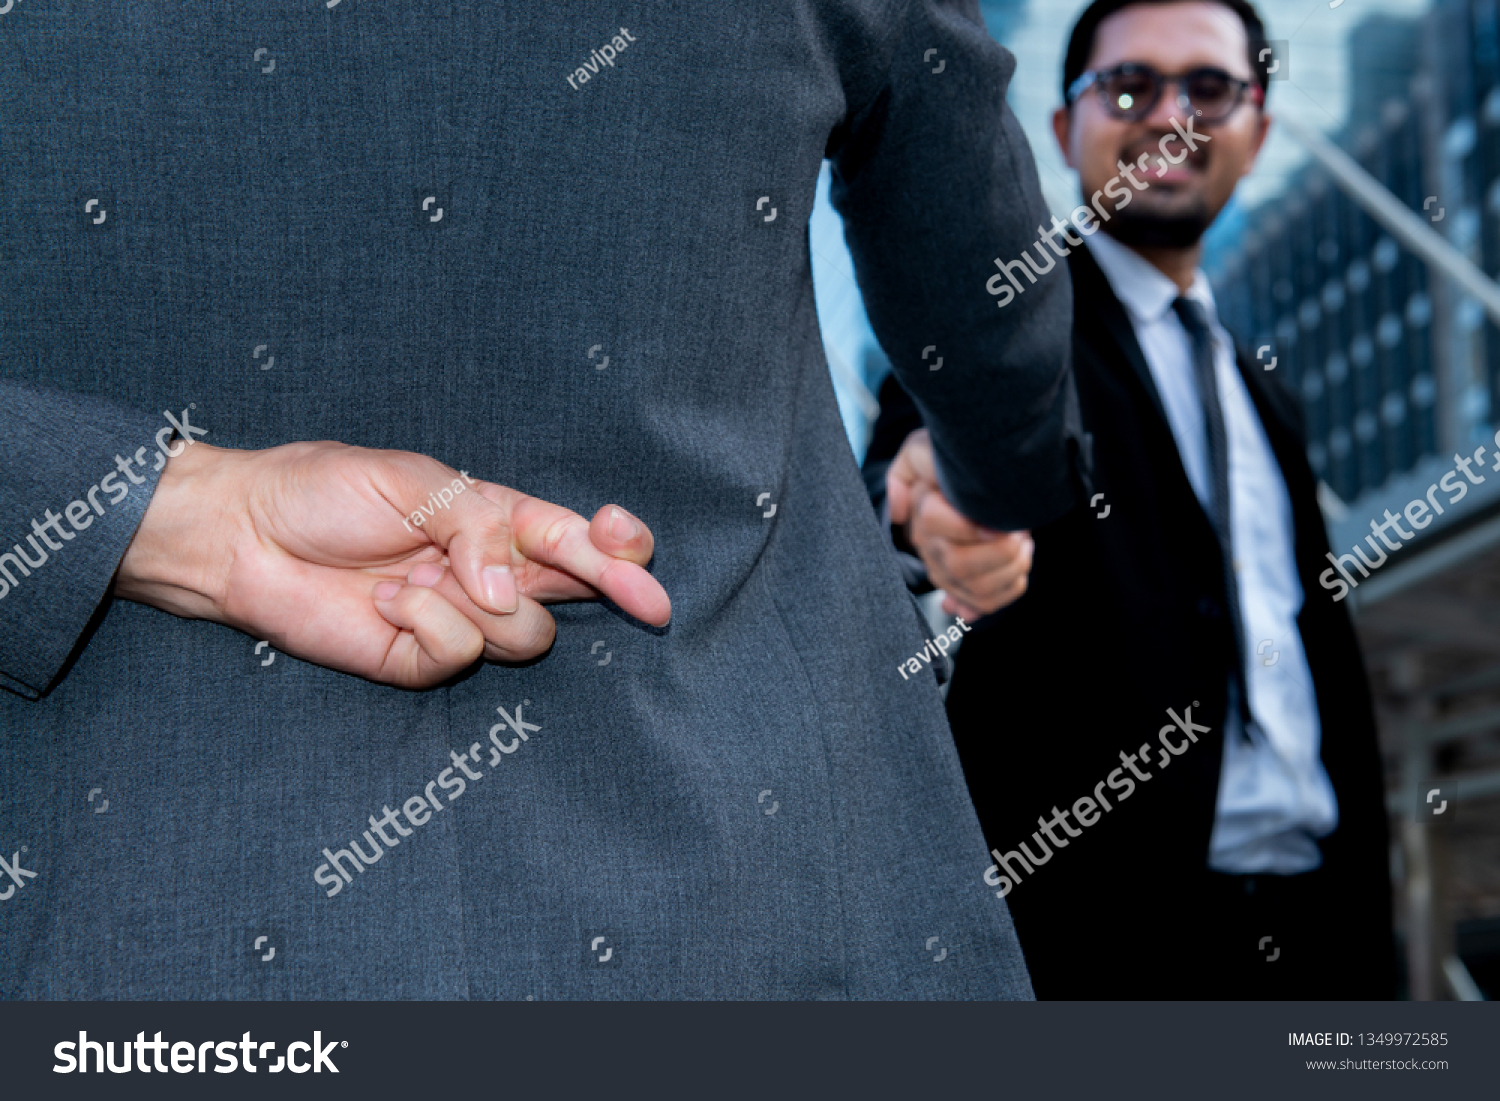 Politician shake hands together and holding another fingers crossed behind his back,Honesty isn't always,Here's when it might be better to lie,Dishonest businessman telling lies,Trickery Concept  #1349972585